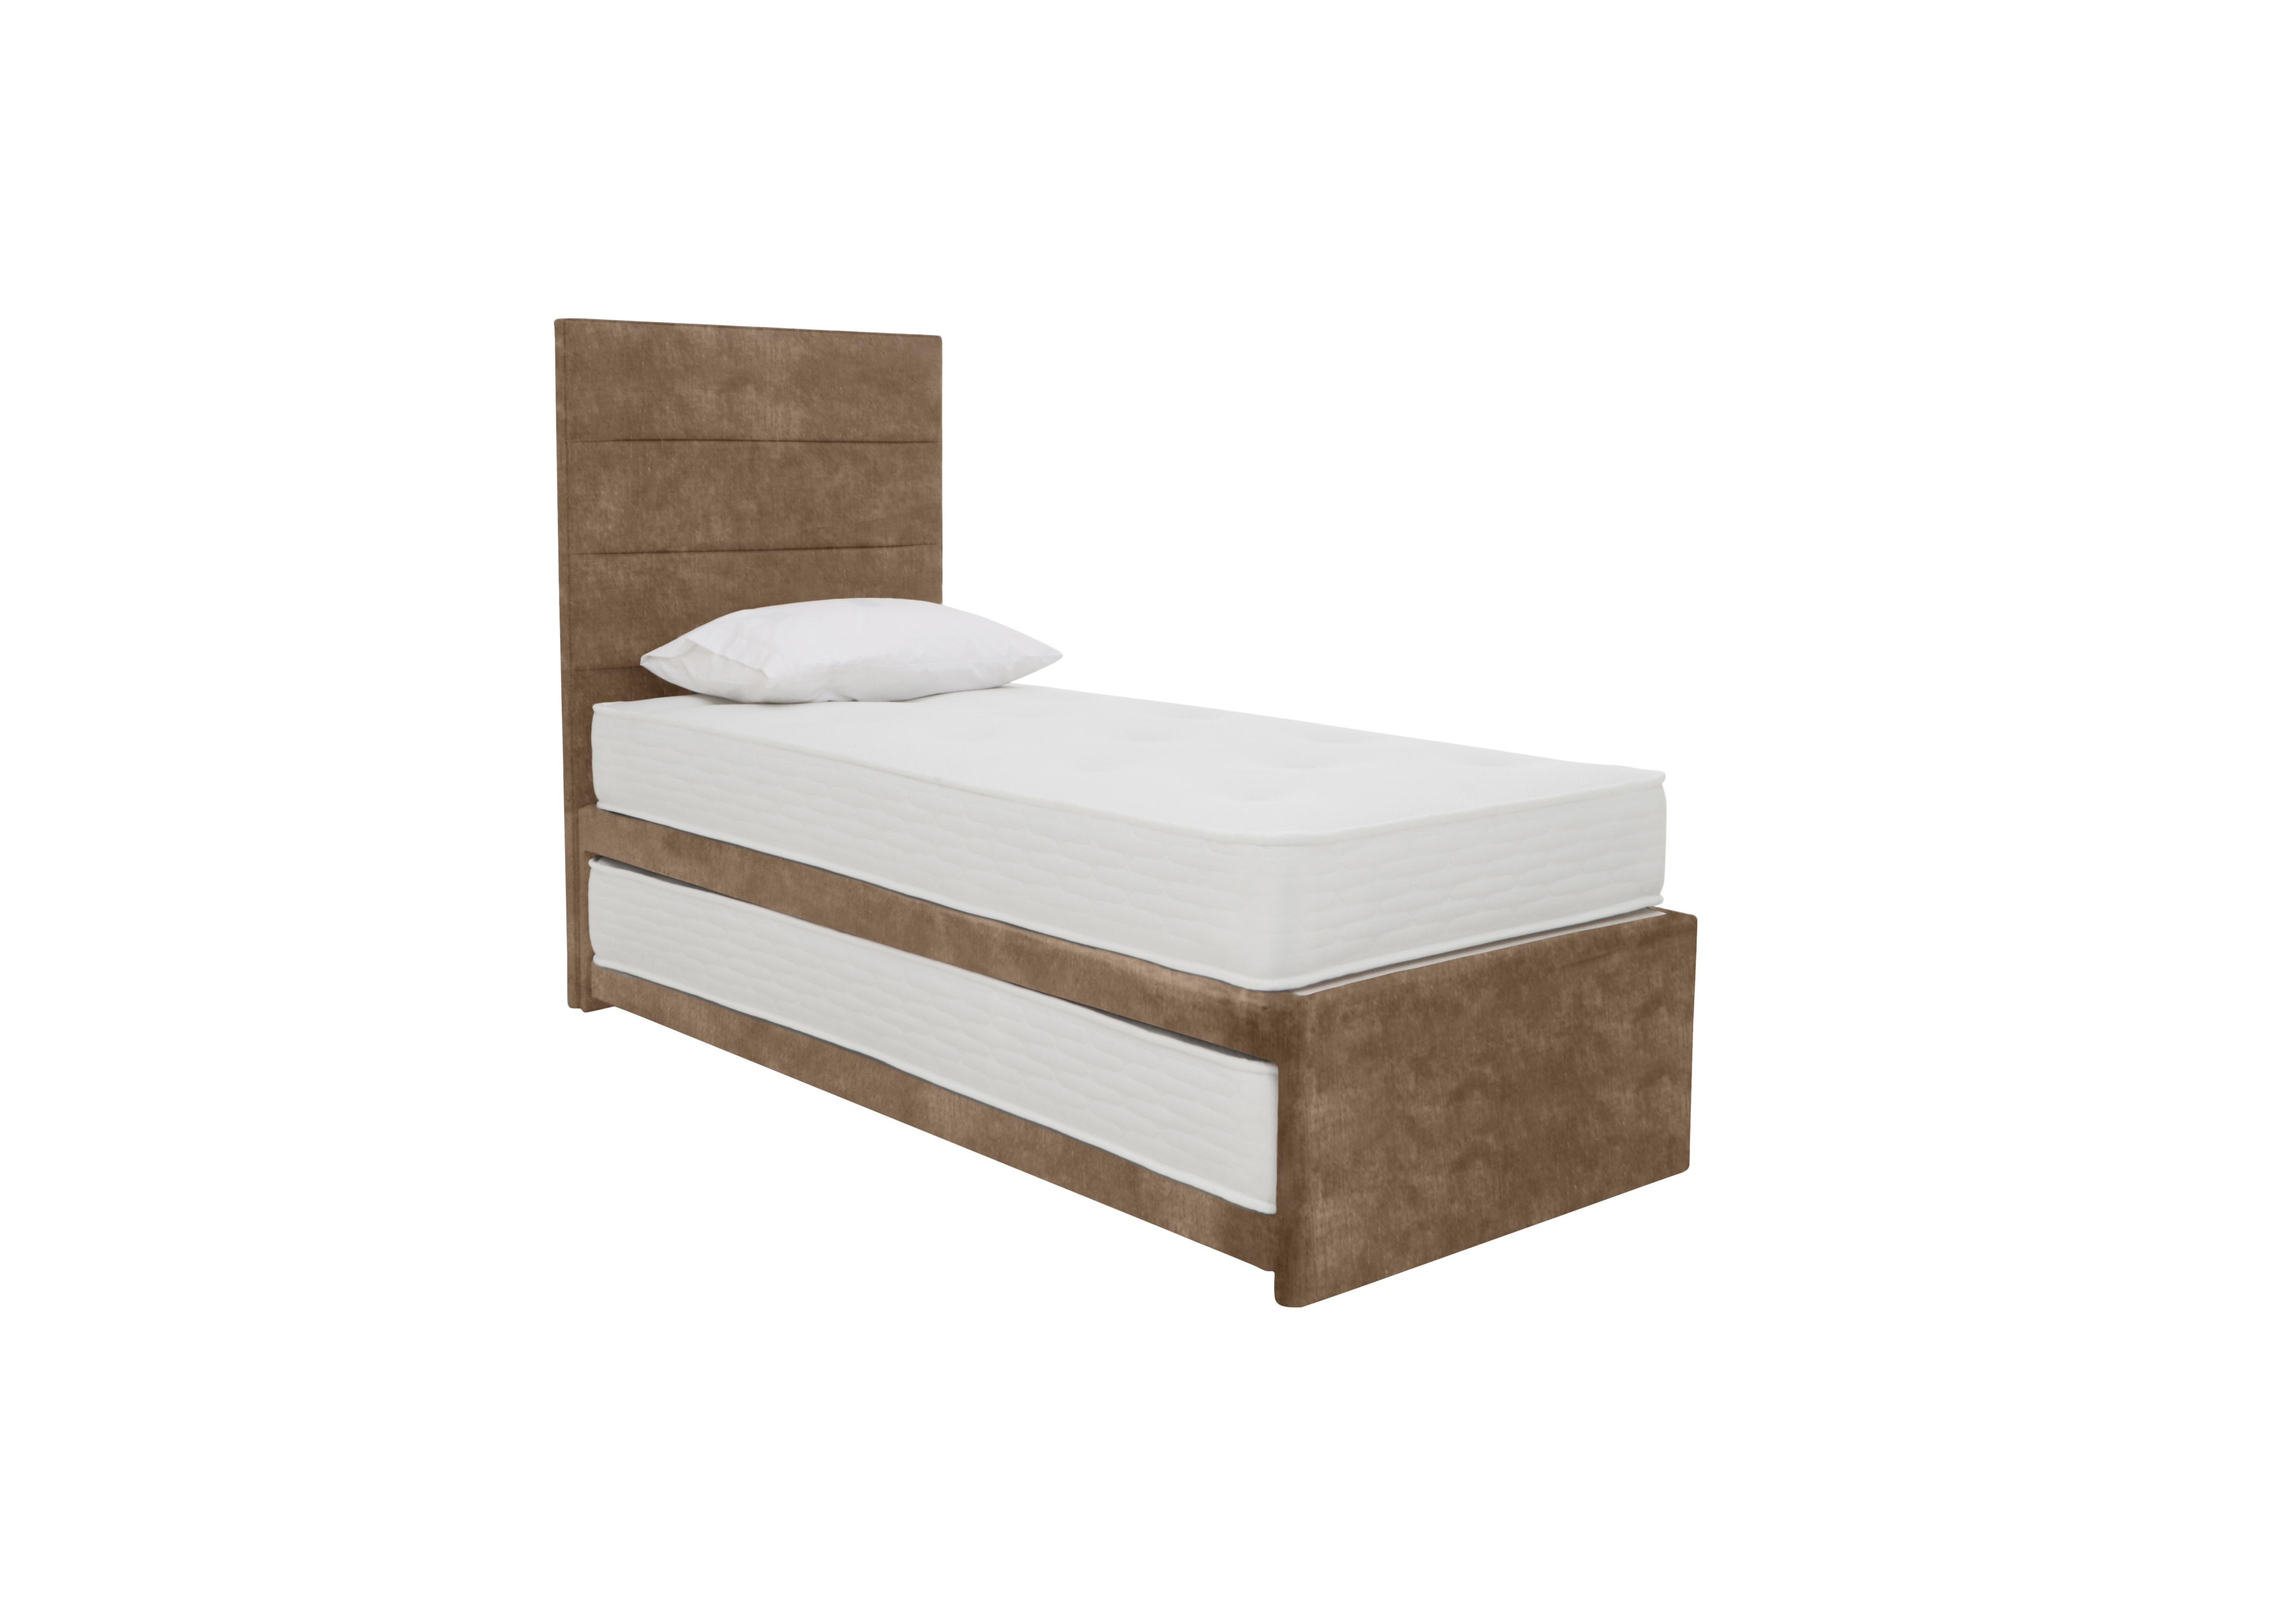 Guest Bed with Coil Mattress and Pocket Sprung Mattress in Lace Caramel on Furniture Village